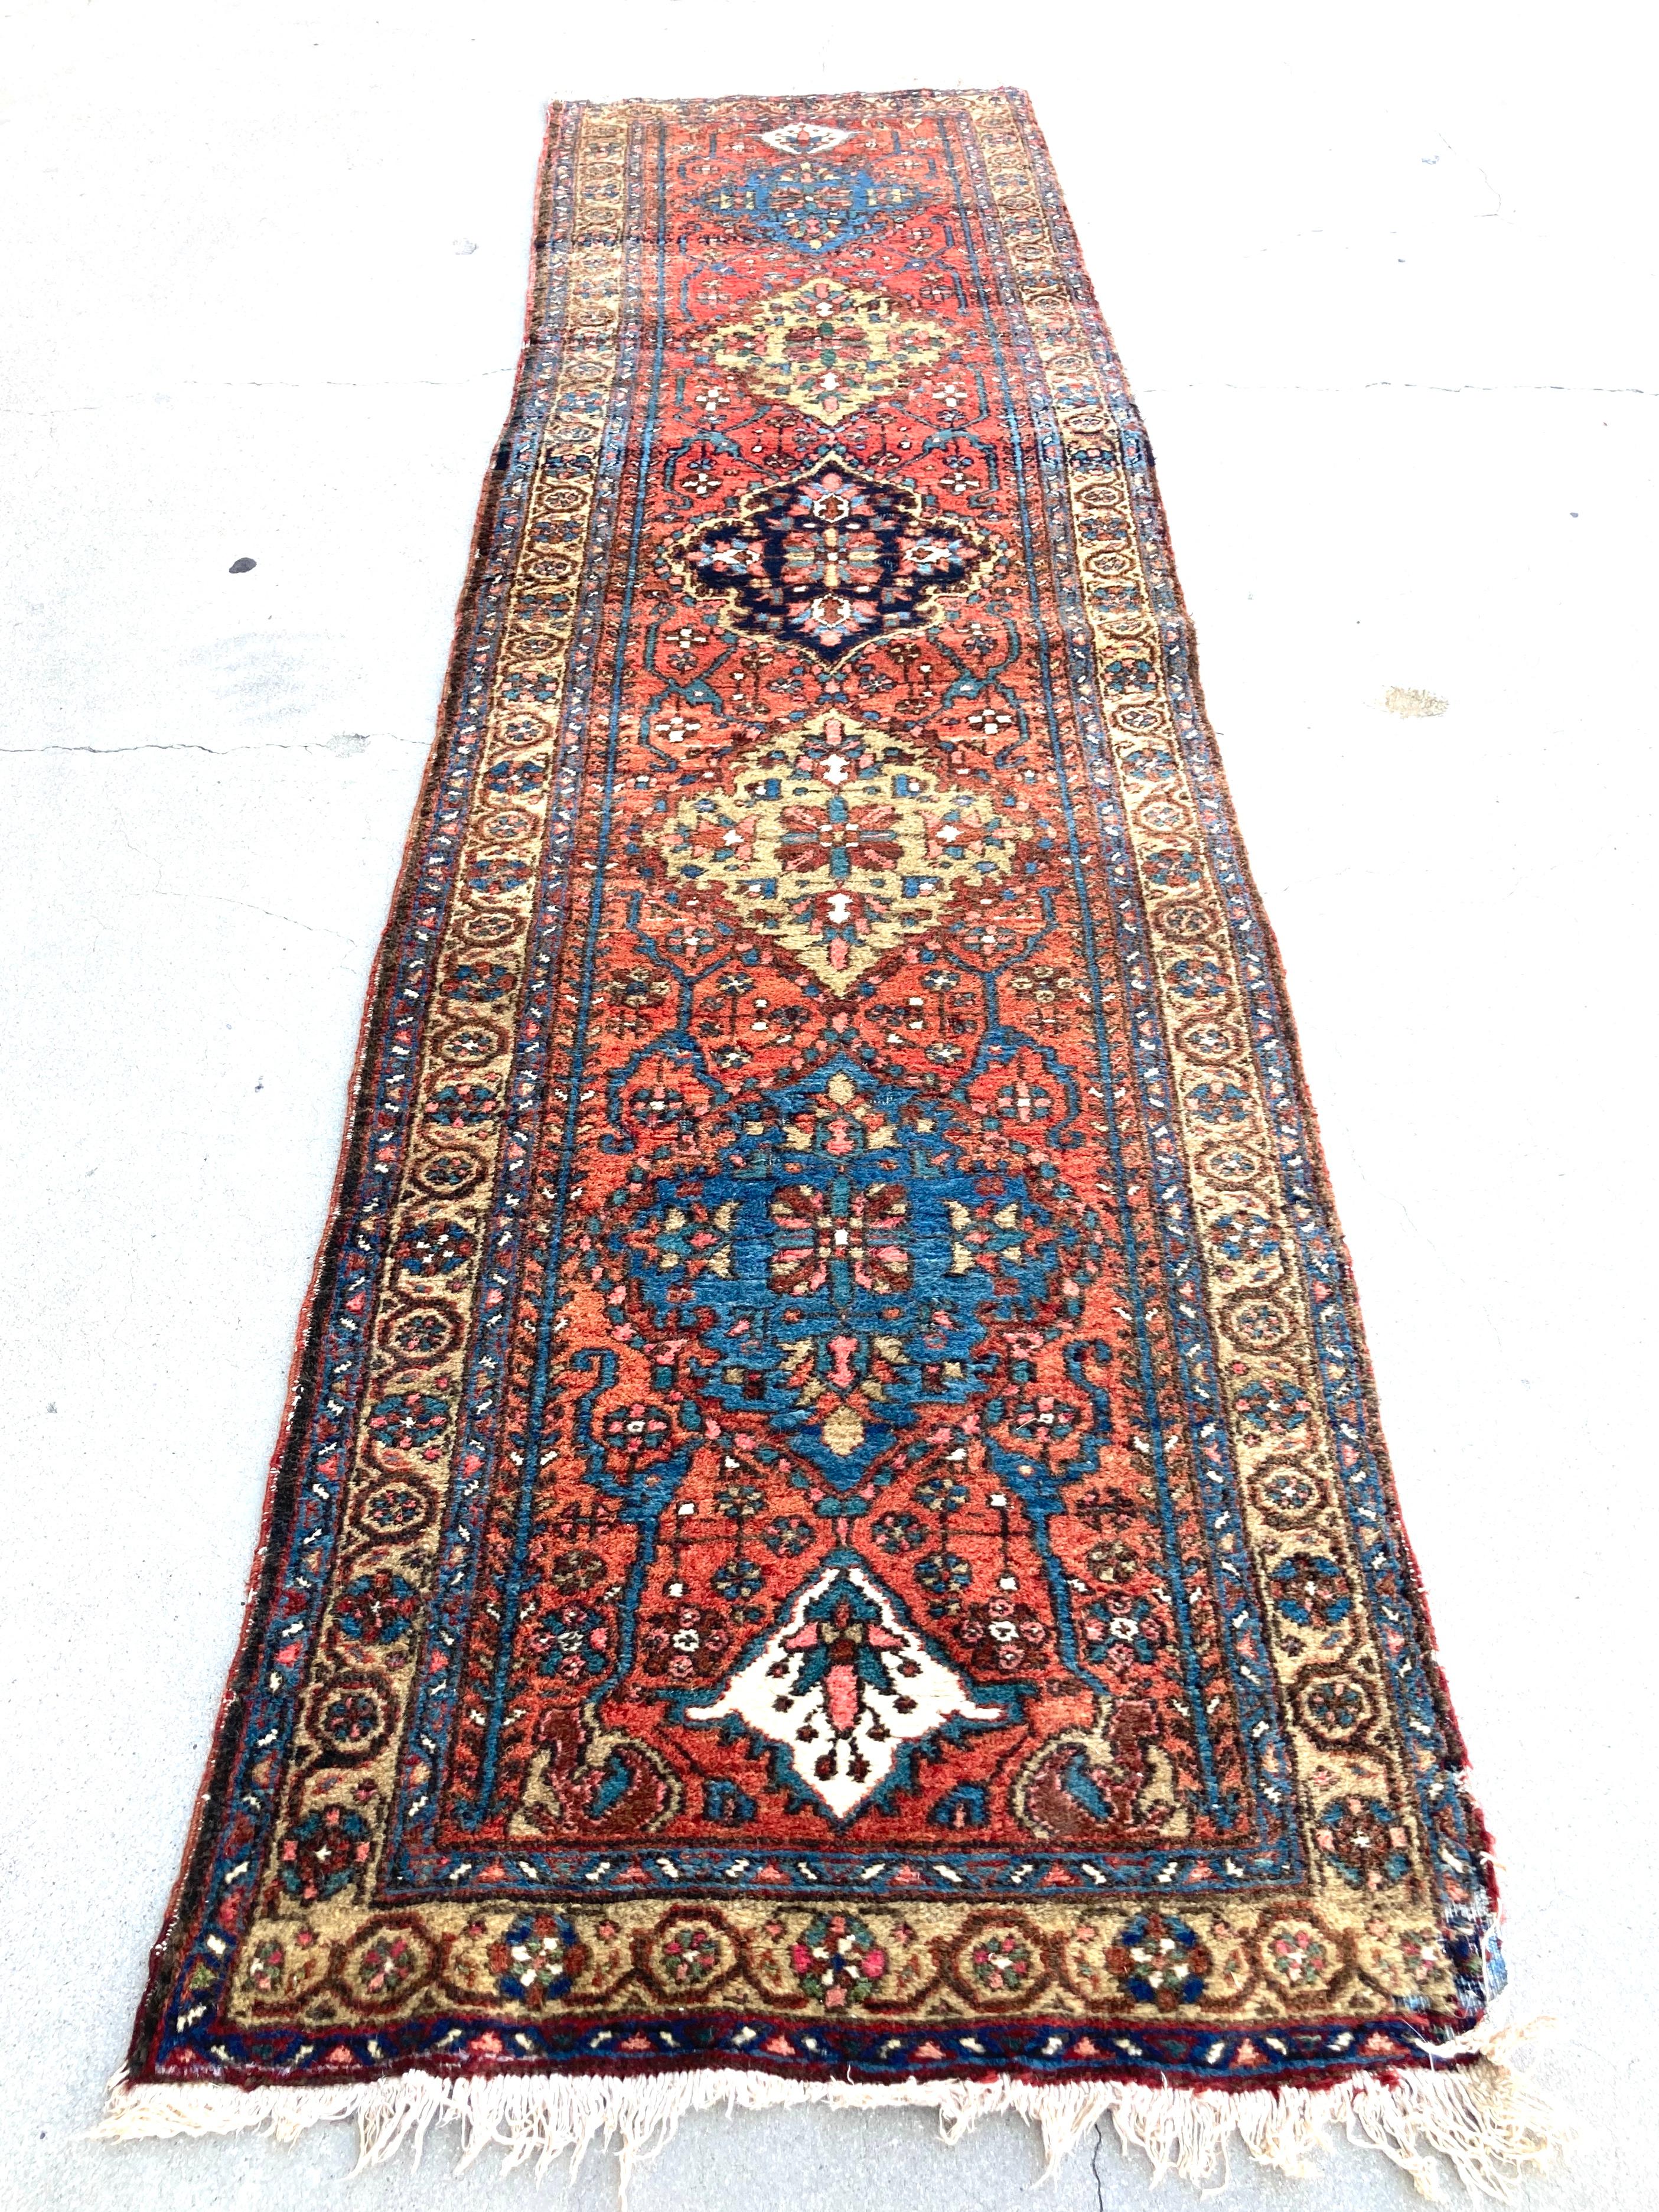 Hand knotted runner from Eastern Turkey,
Vintage Middle Eastern rug, circa 1940.
Size: 2ft 9 in x 10ft 7in.
Traditional Turkish carpet design and blue and pink colors.